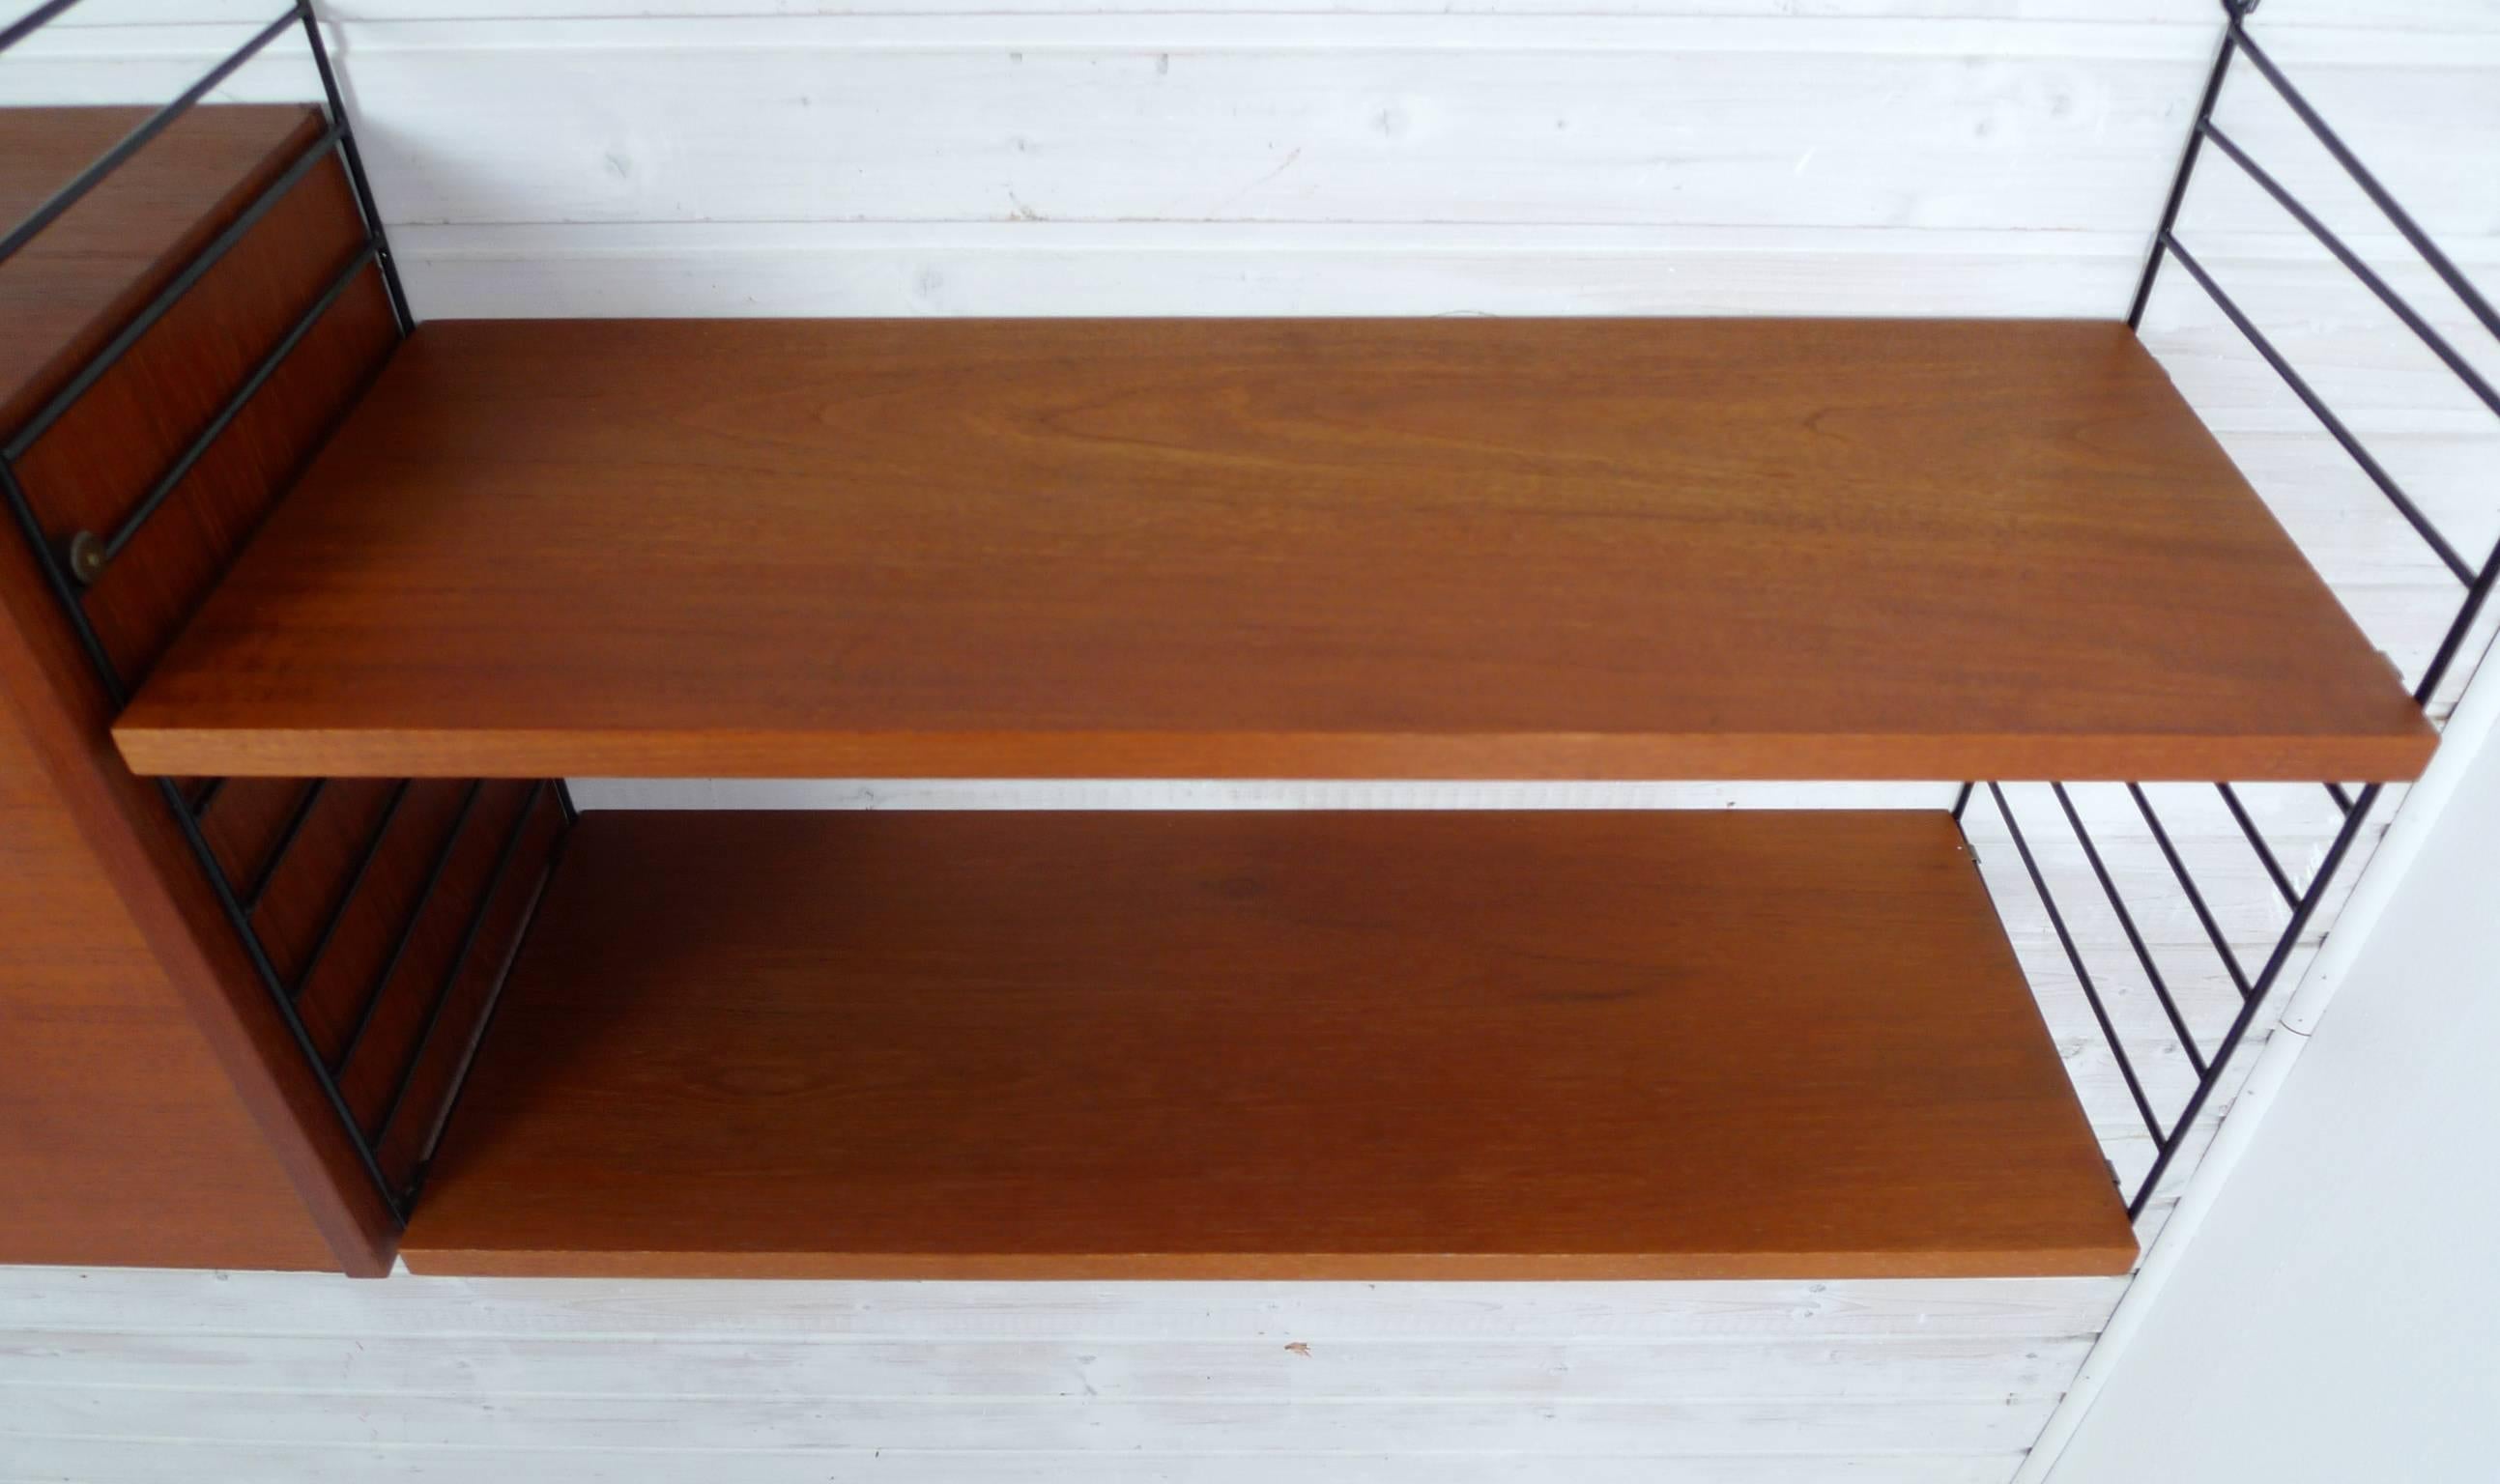 Swedish Wall Unit with Teak Box and Shelves by Nisse Strinning for String, 1950s For Sale 3